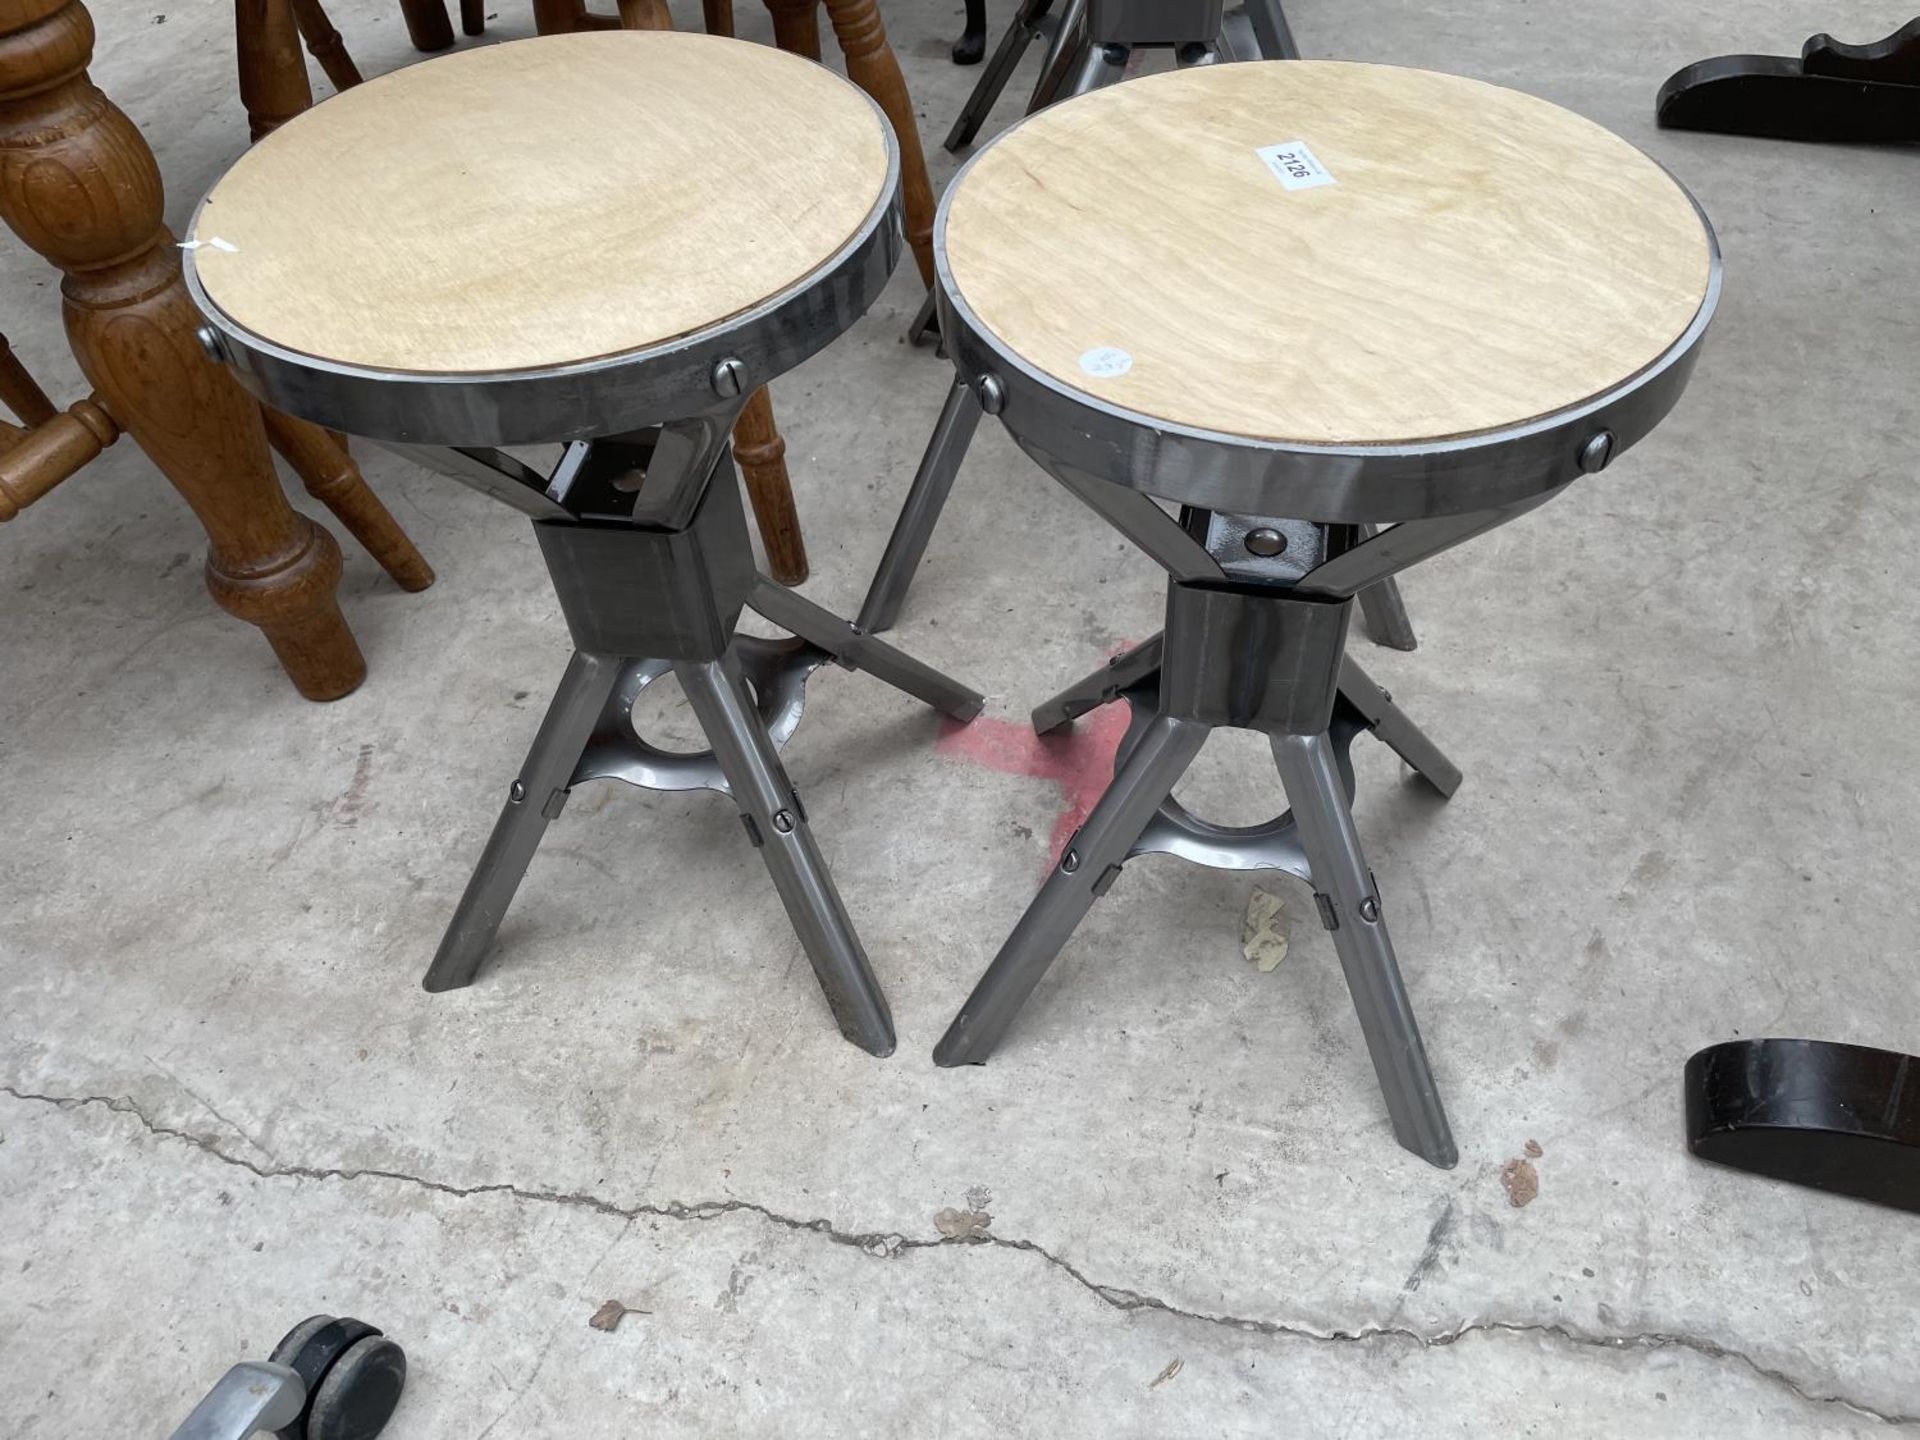 TWO LOW POLISHED METAL INDUSTRIAL STYLE STOOLS H: 18 INCHES